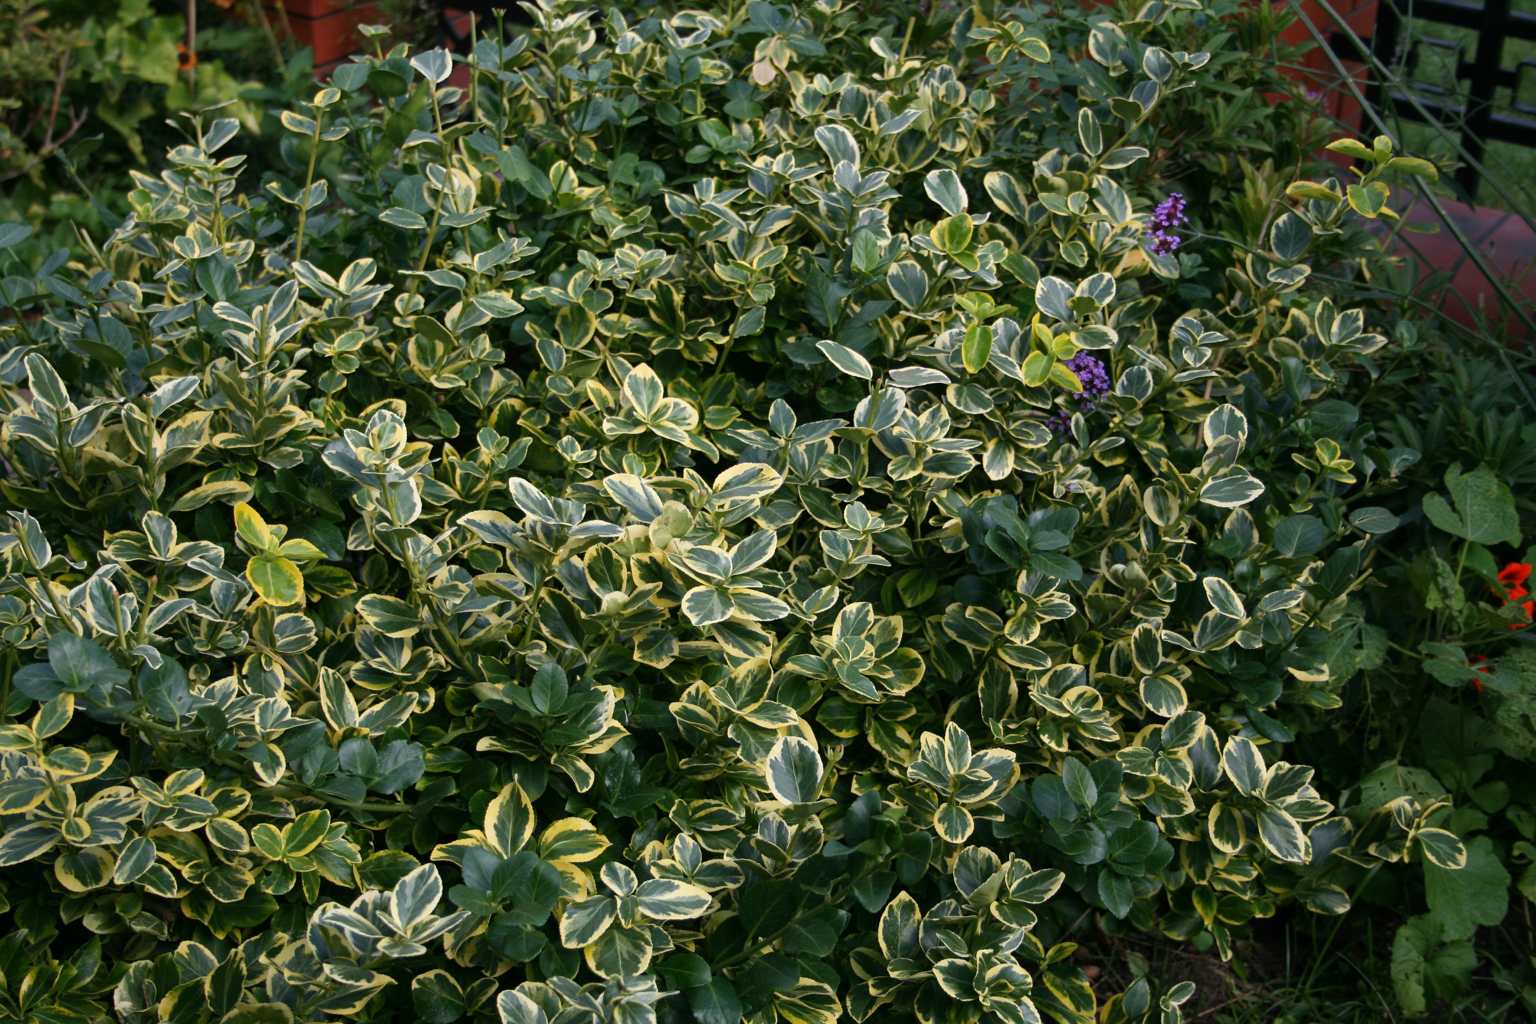 Trzmielina Fortunea "Canadale Gold" / Euonymus fortunei "Canadale Gold"